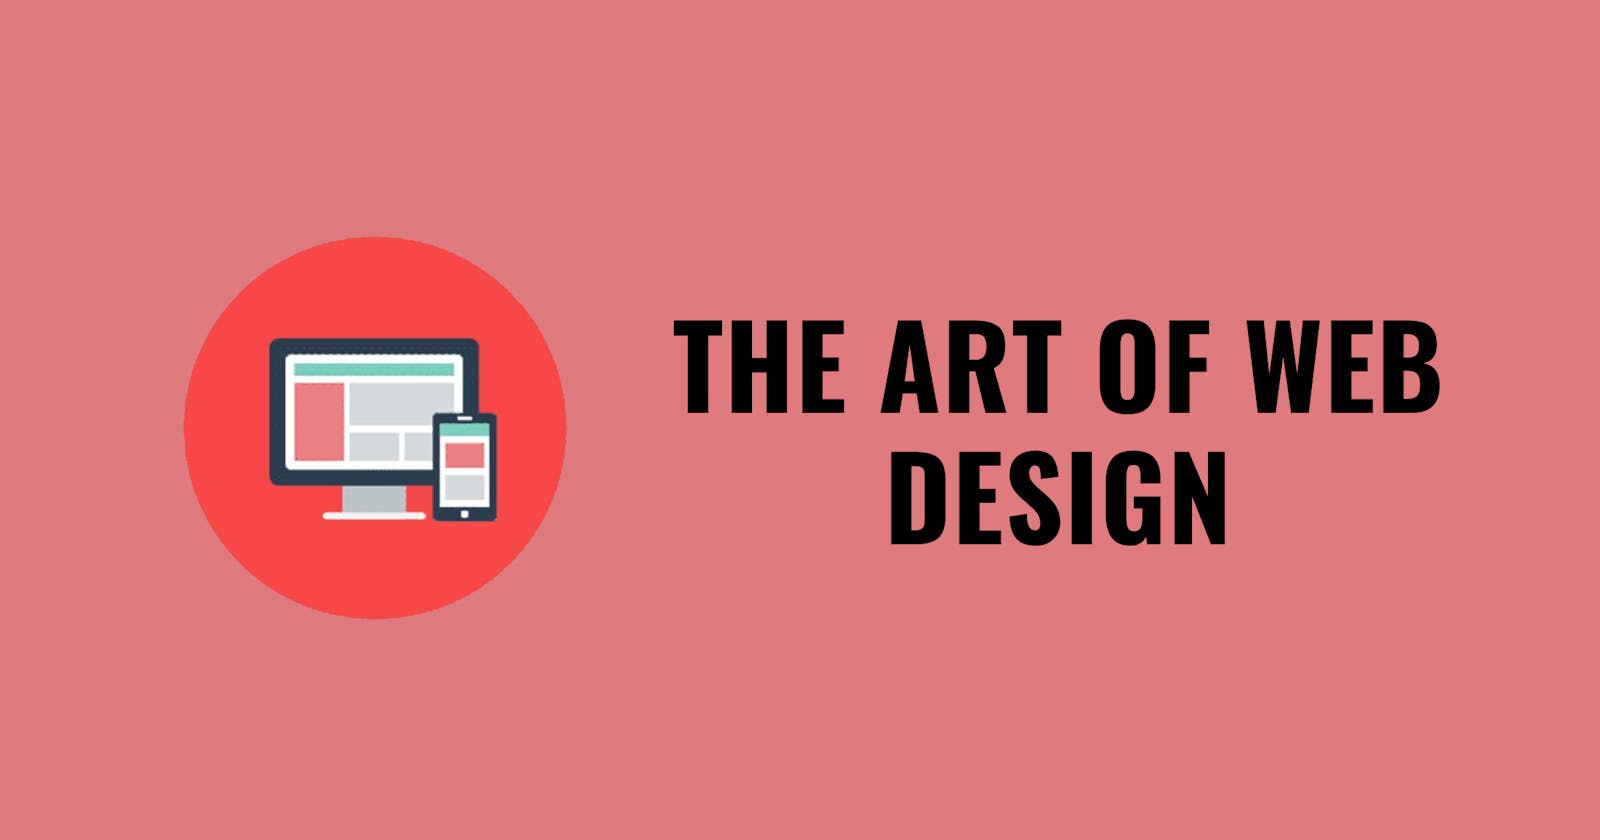 The Art Of Web Design: Creating a Website that Users Love